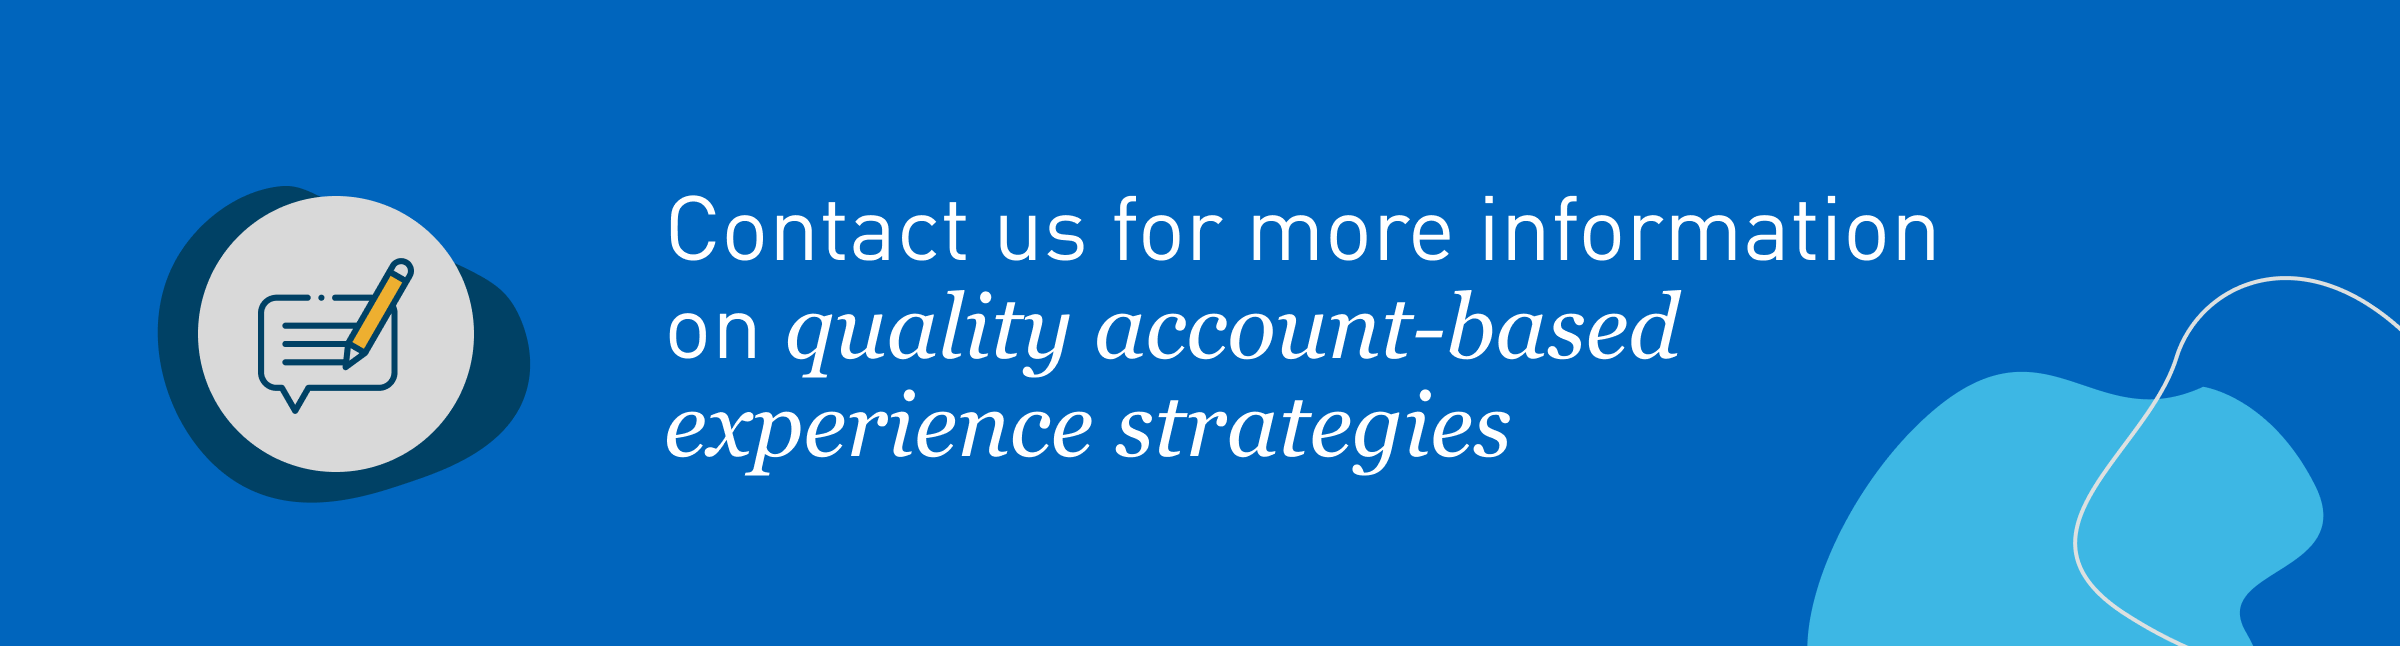 2954: contact us for more information on quality account-based experience strategies 